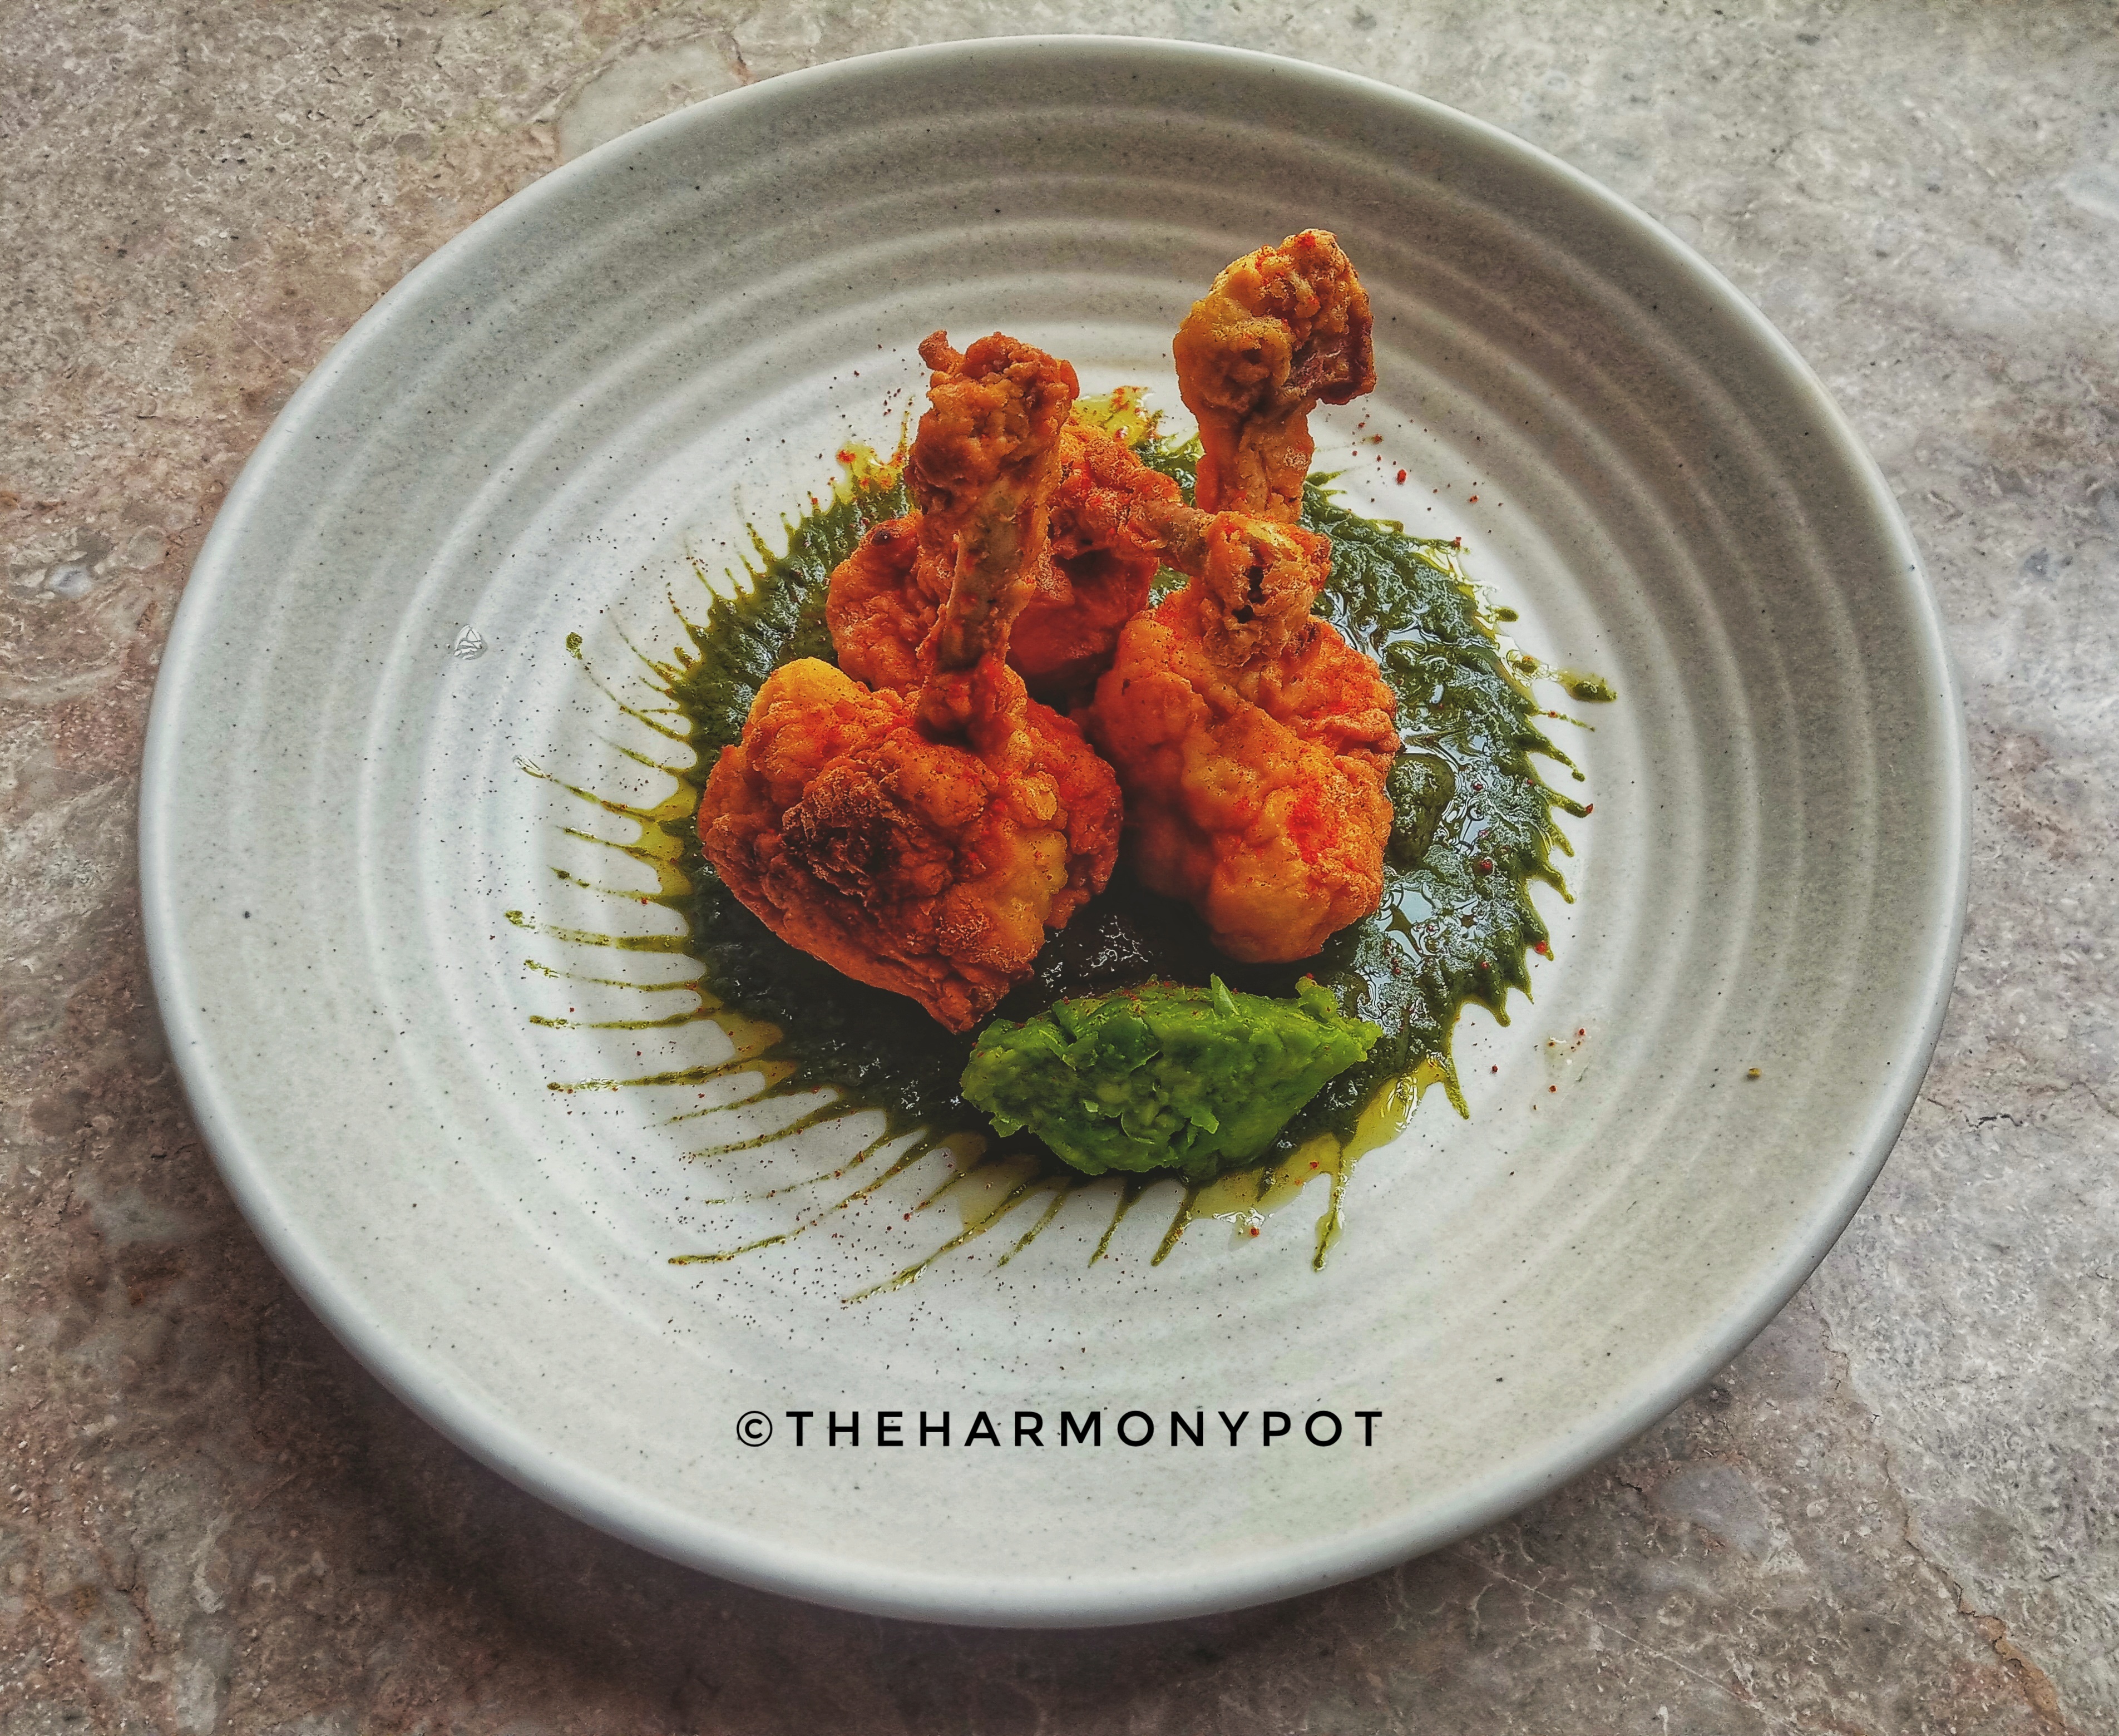 Crispy Chicken lollipops with Spinach Oregano Sauce and Green peas mint Mashed 